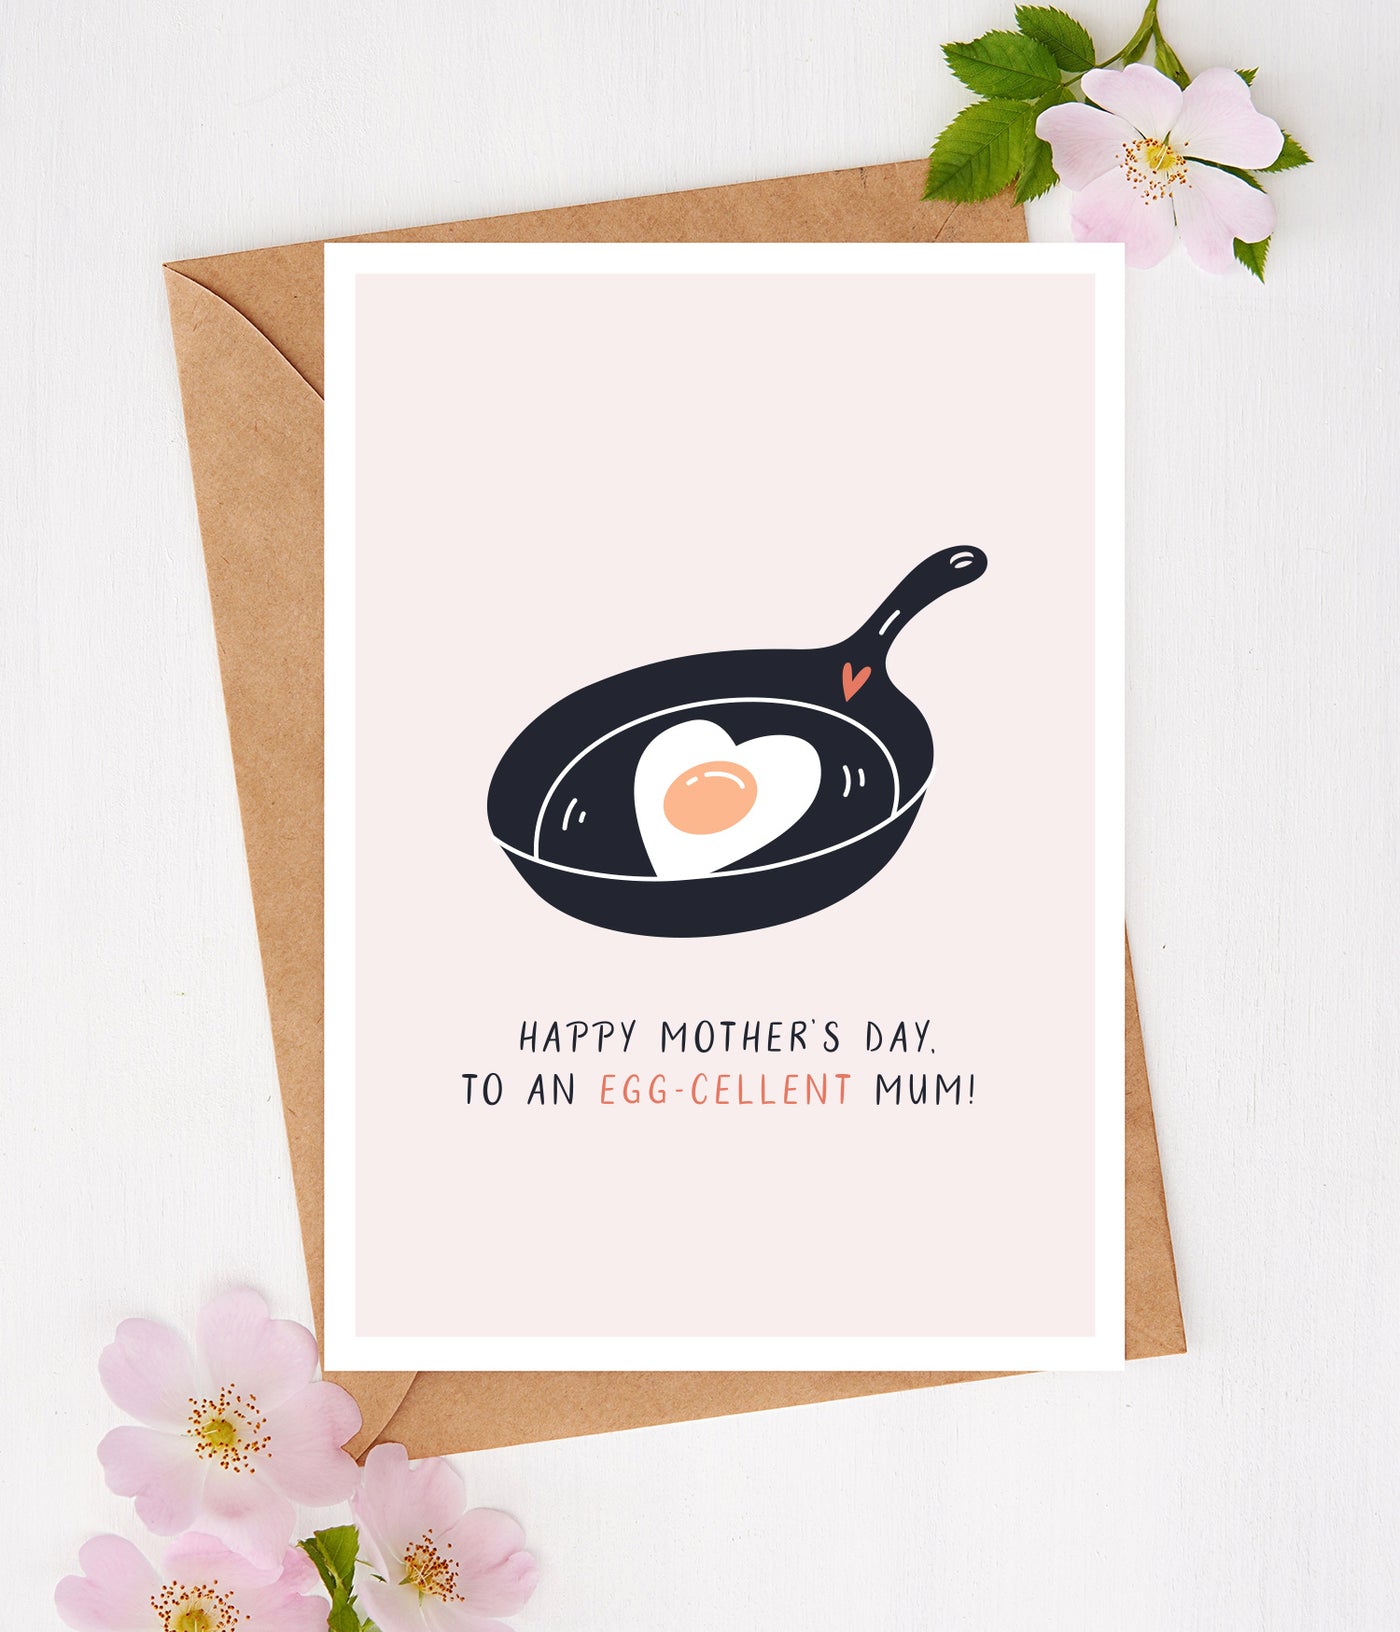 'Egg-cellent Mum' Mother's Day Card